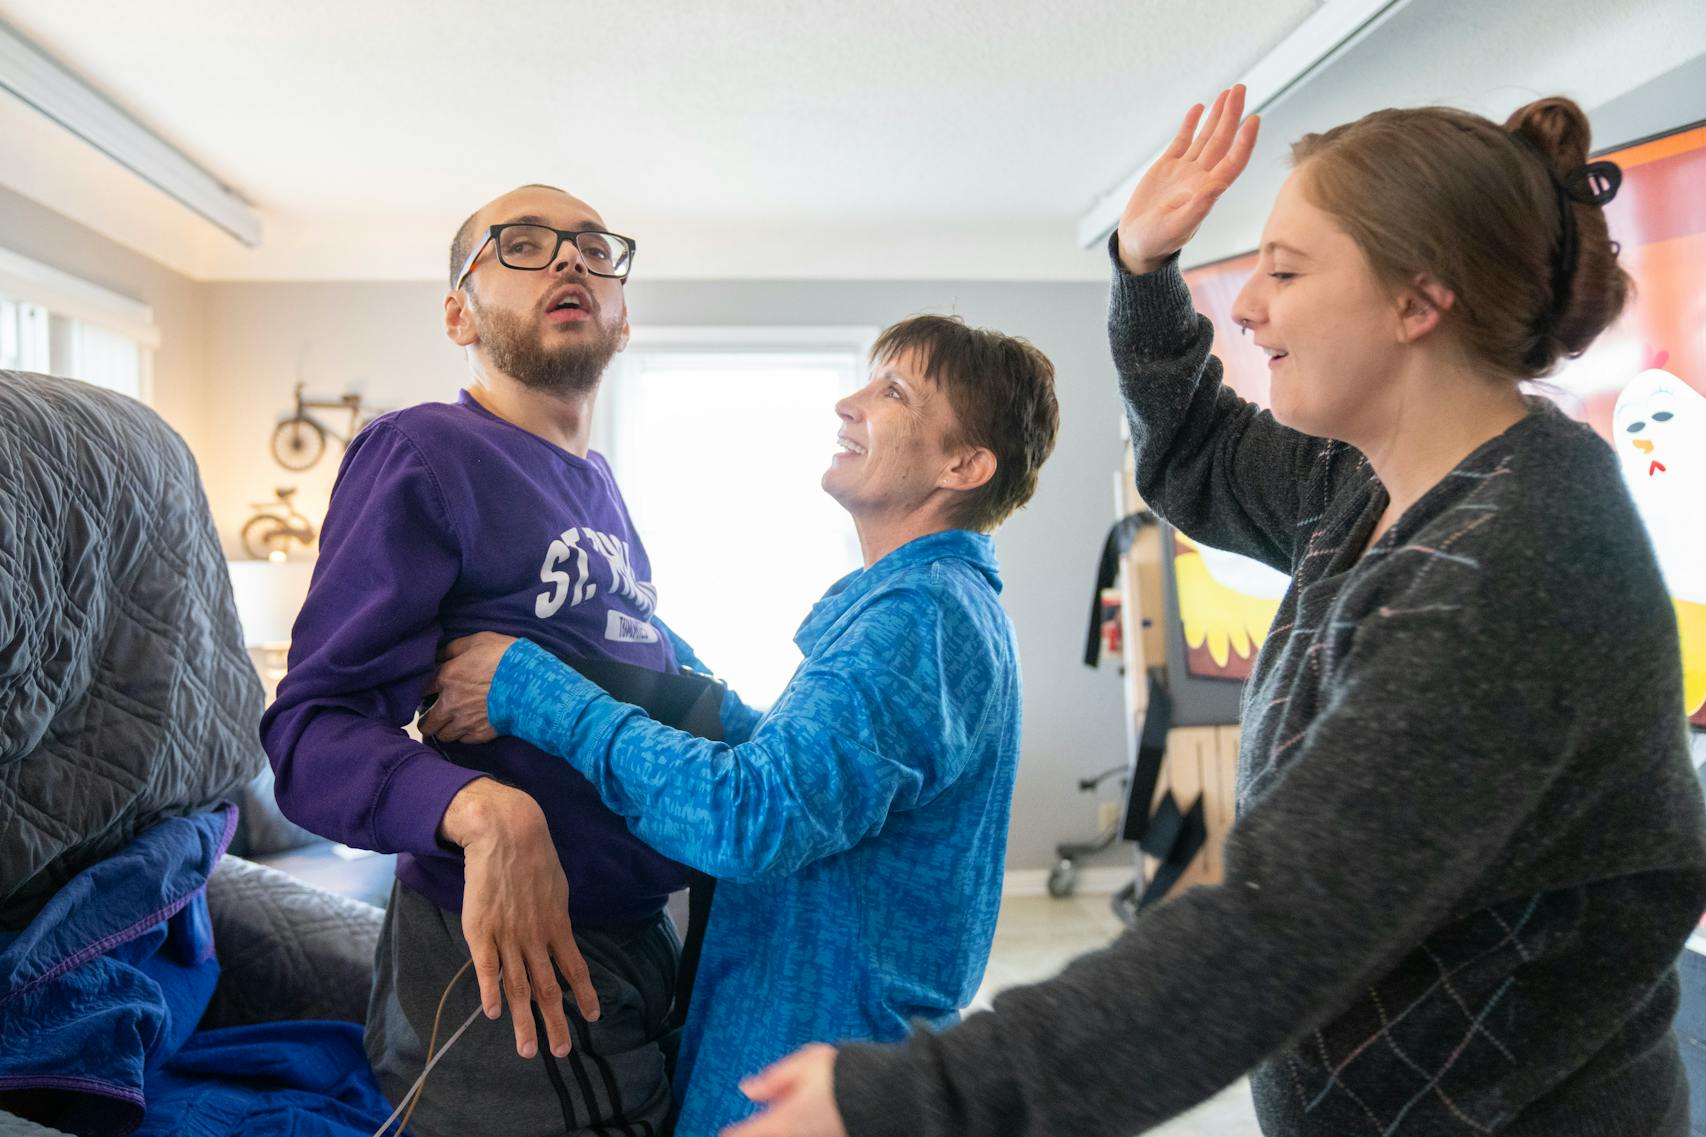 Physical therapist Lori McCoy helps Kylen Ware during therapy, which he has once a week, as Ashley Topp, a community inclusion specialist, offers a high-five in praise of his efforts.